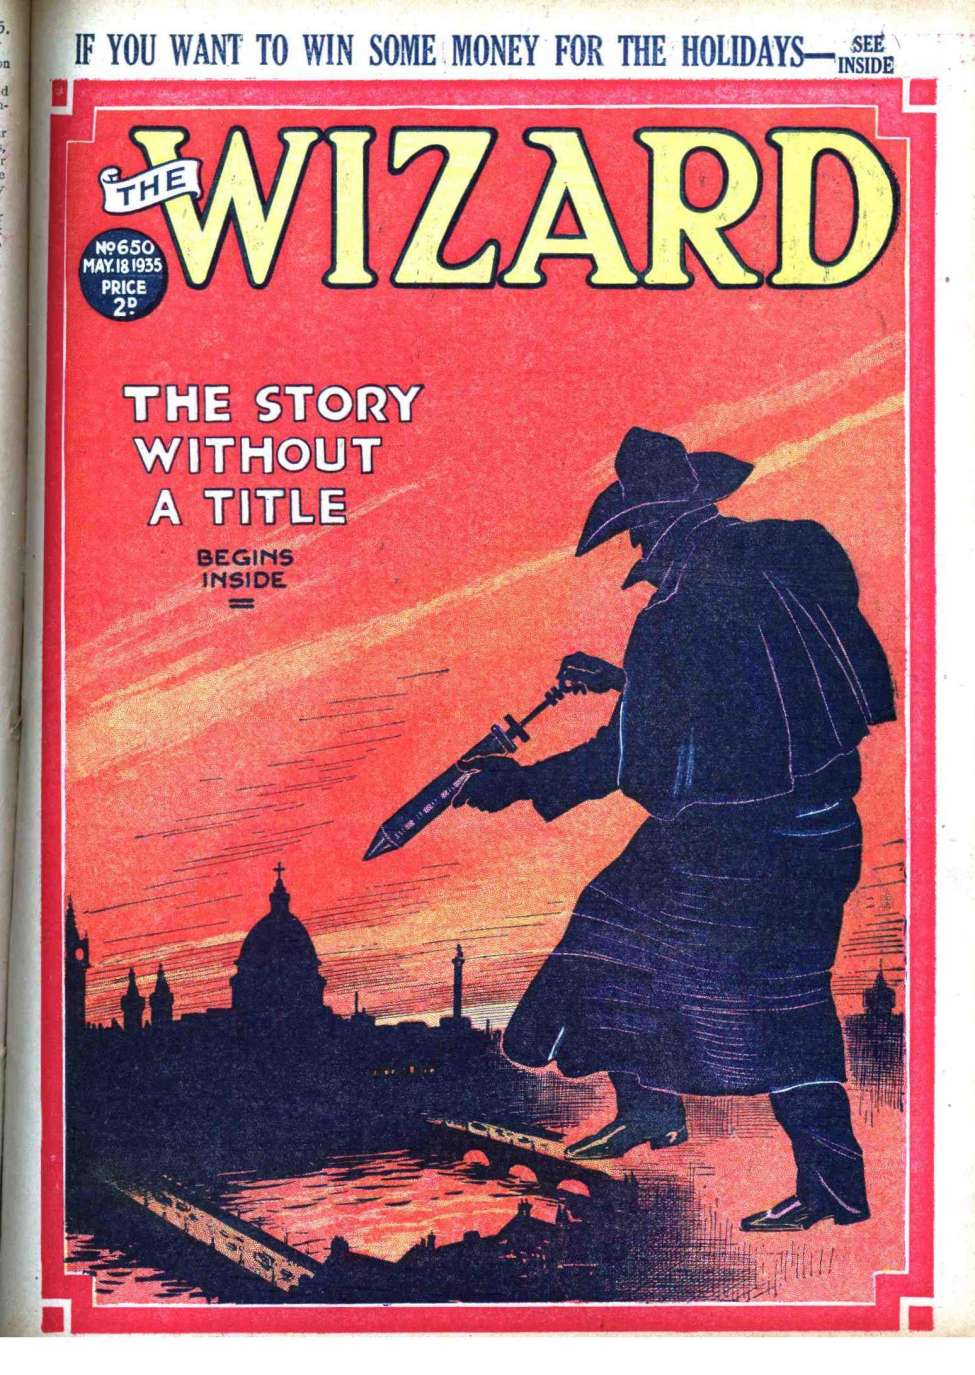 Book Cover For The Wizard 650